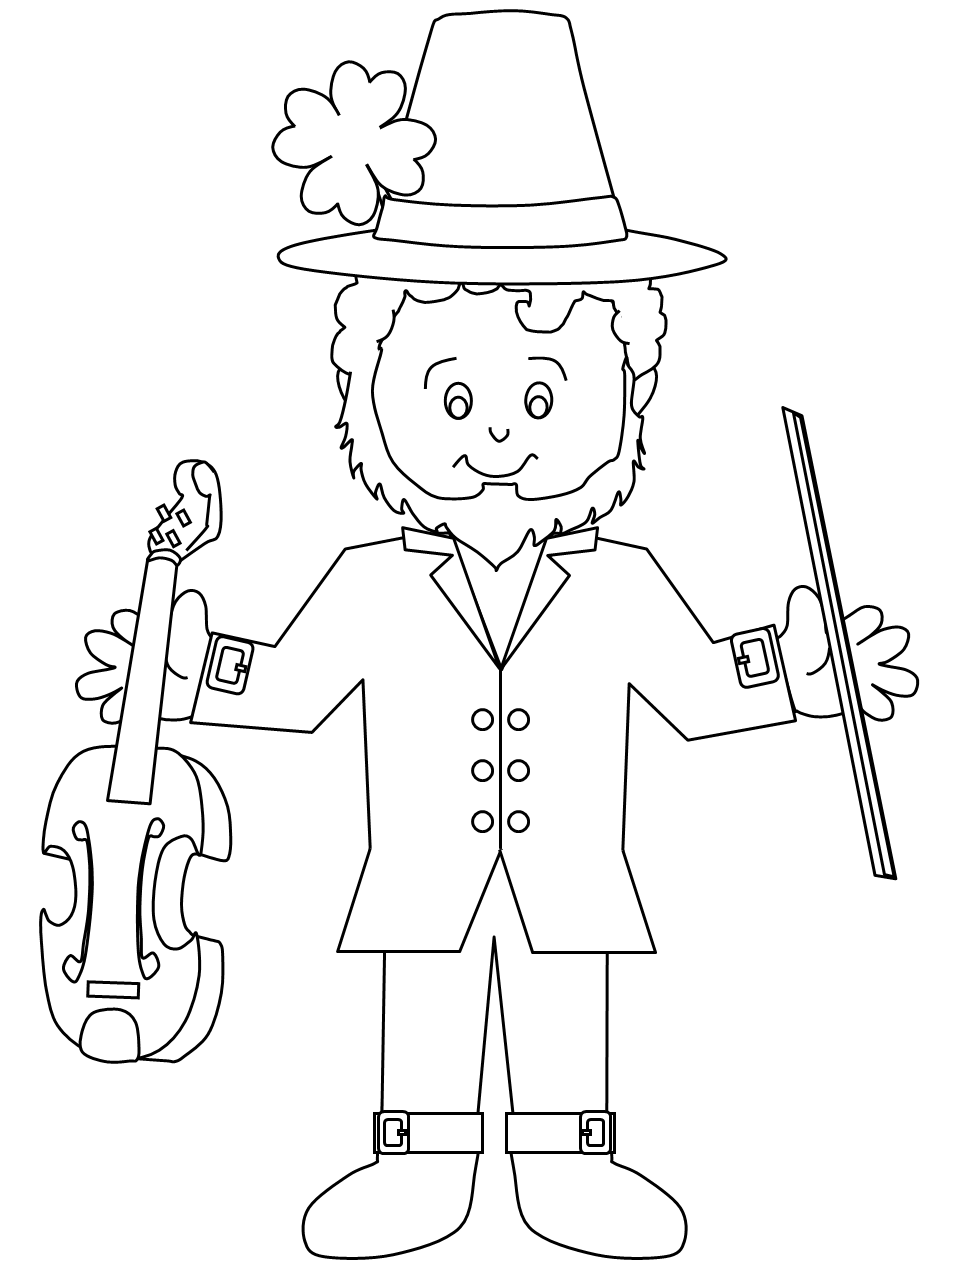 St Patricks Day drawing and coloring page